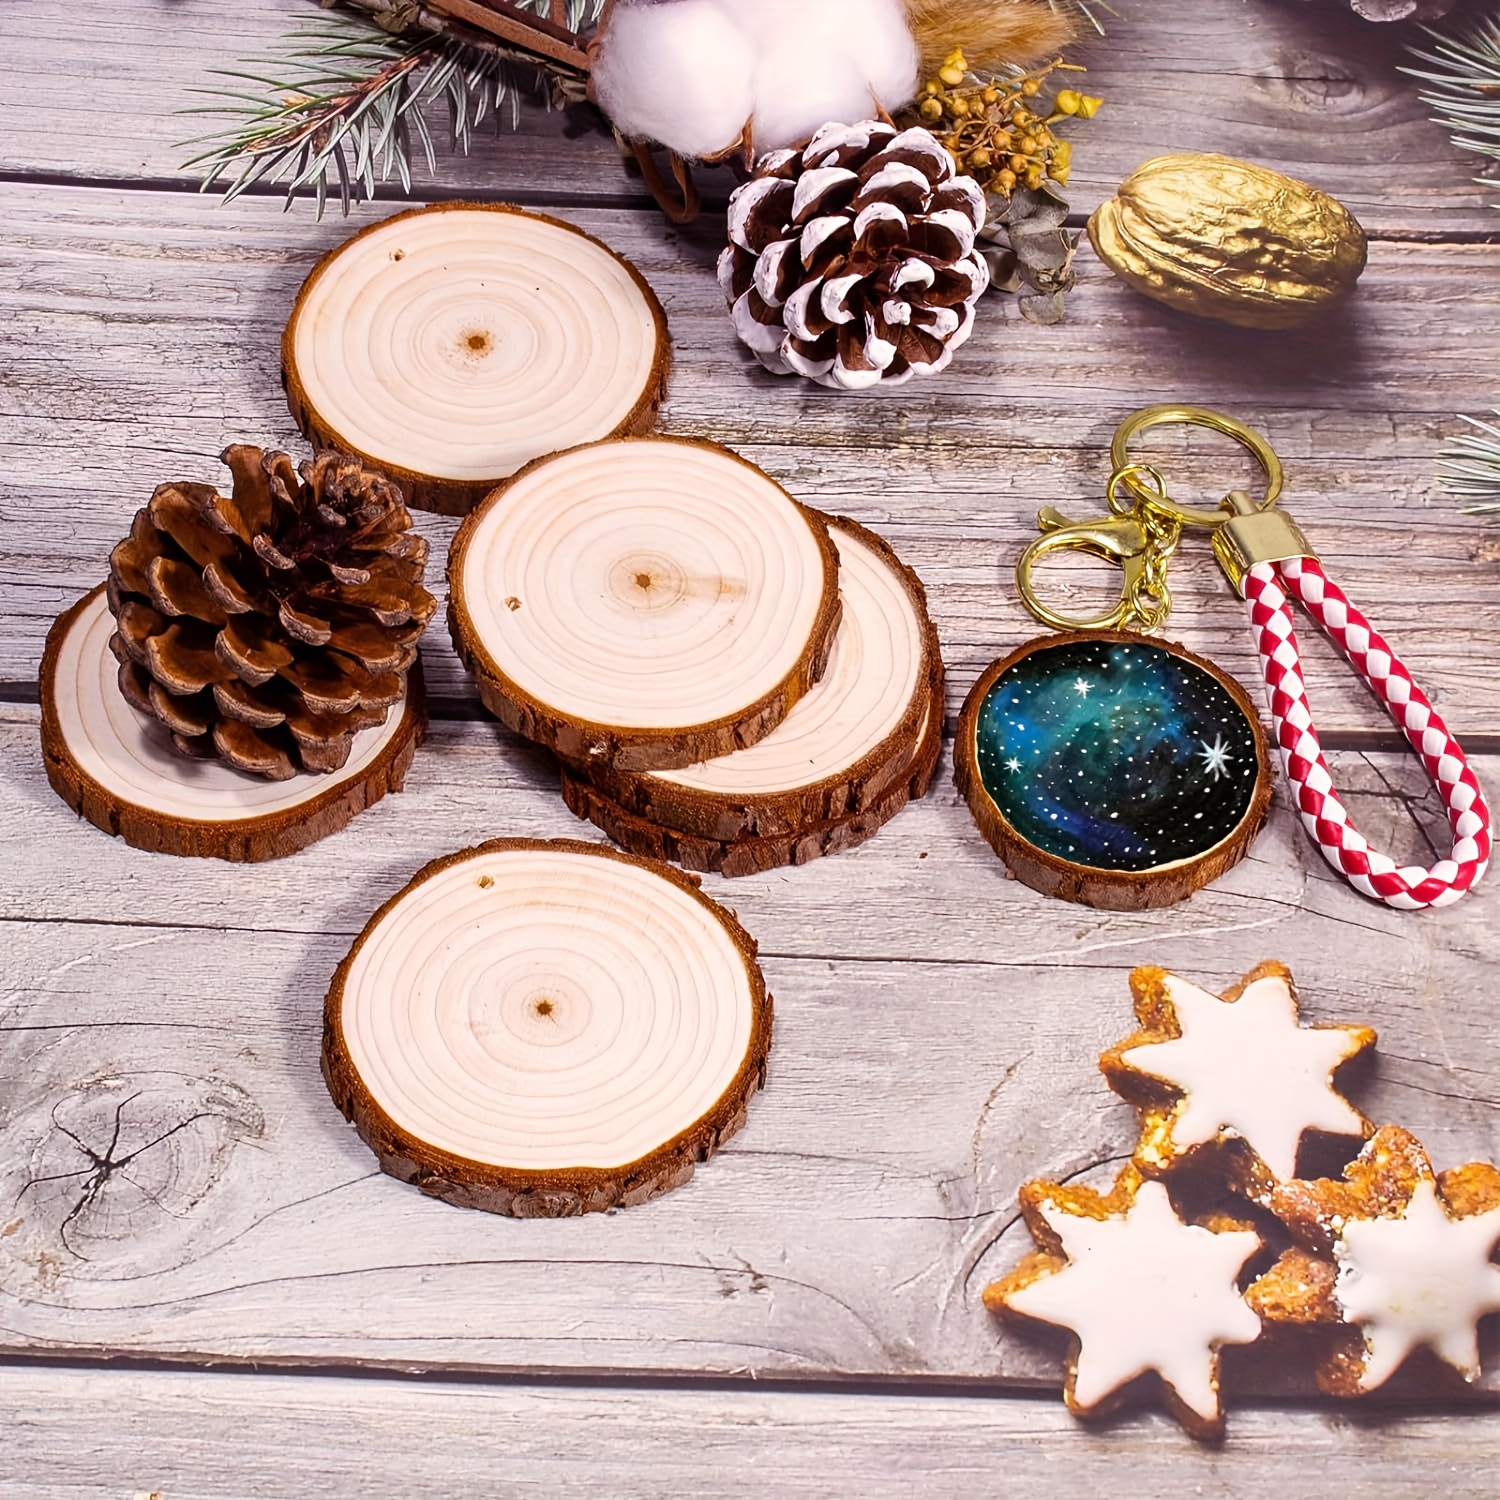  Wood Slices 20 Pcs 3.5-4 Inch Natural Wood Rounds Wooden  Circles for Crafts Christmas Ornaments Unfinished Wood Kit with Predrilled  Hole for DIY Arts Painting Centerpieces